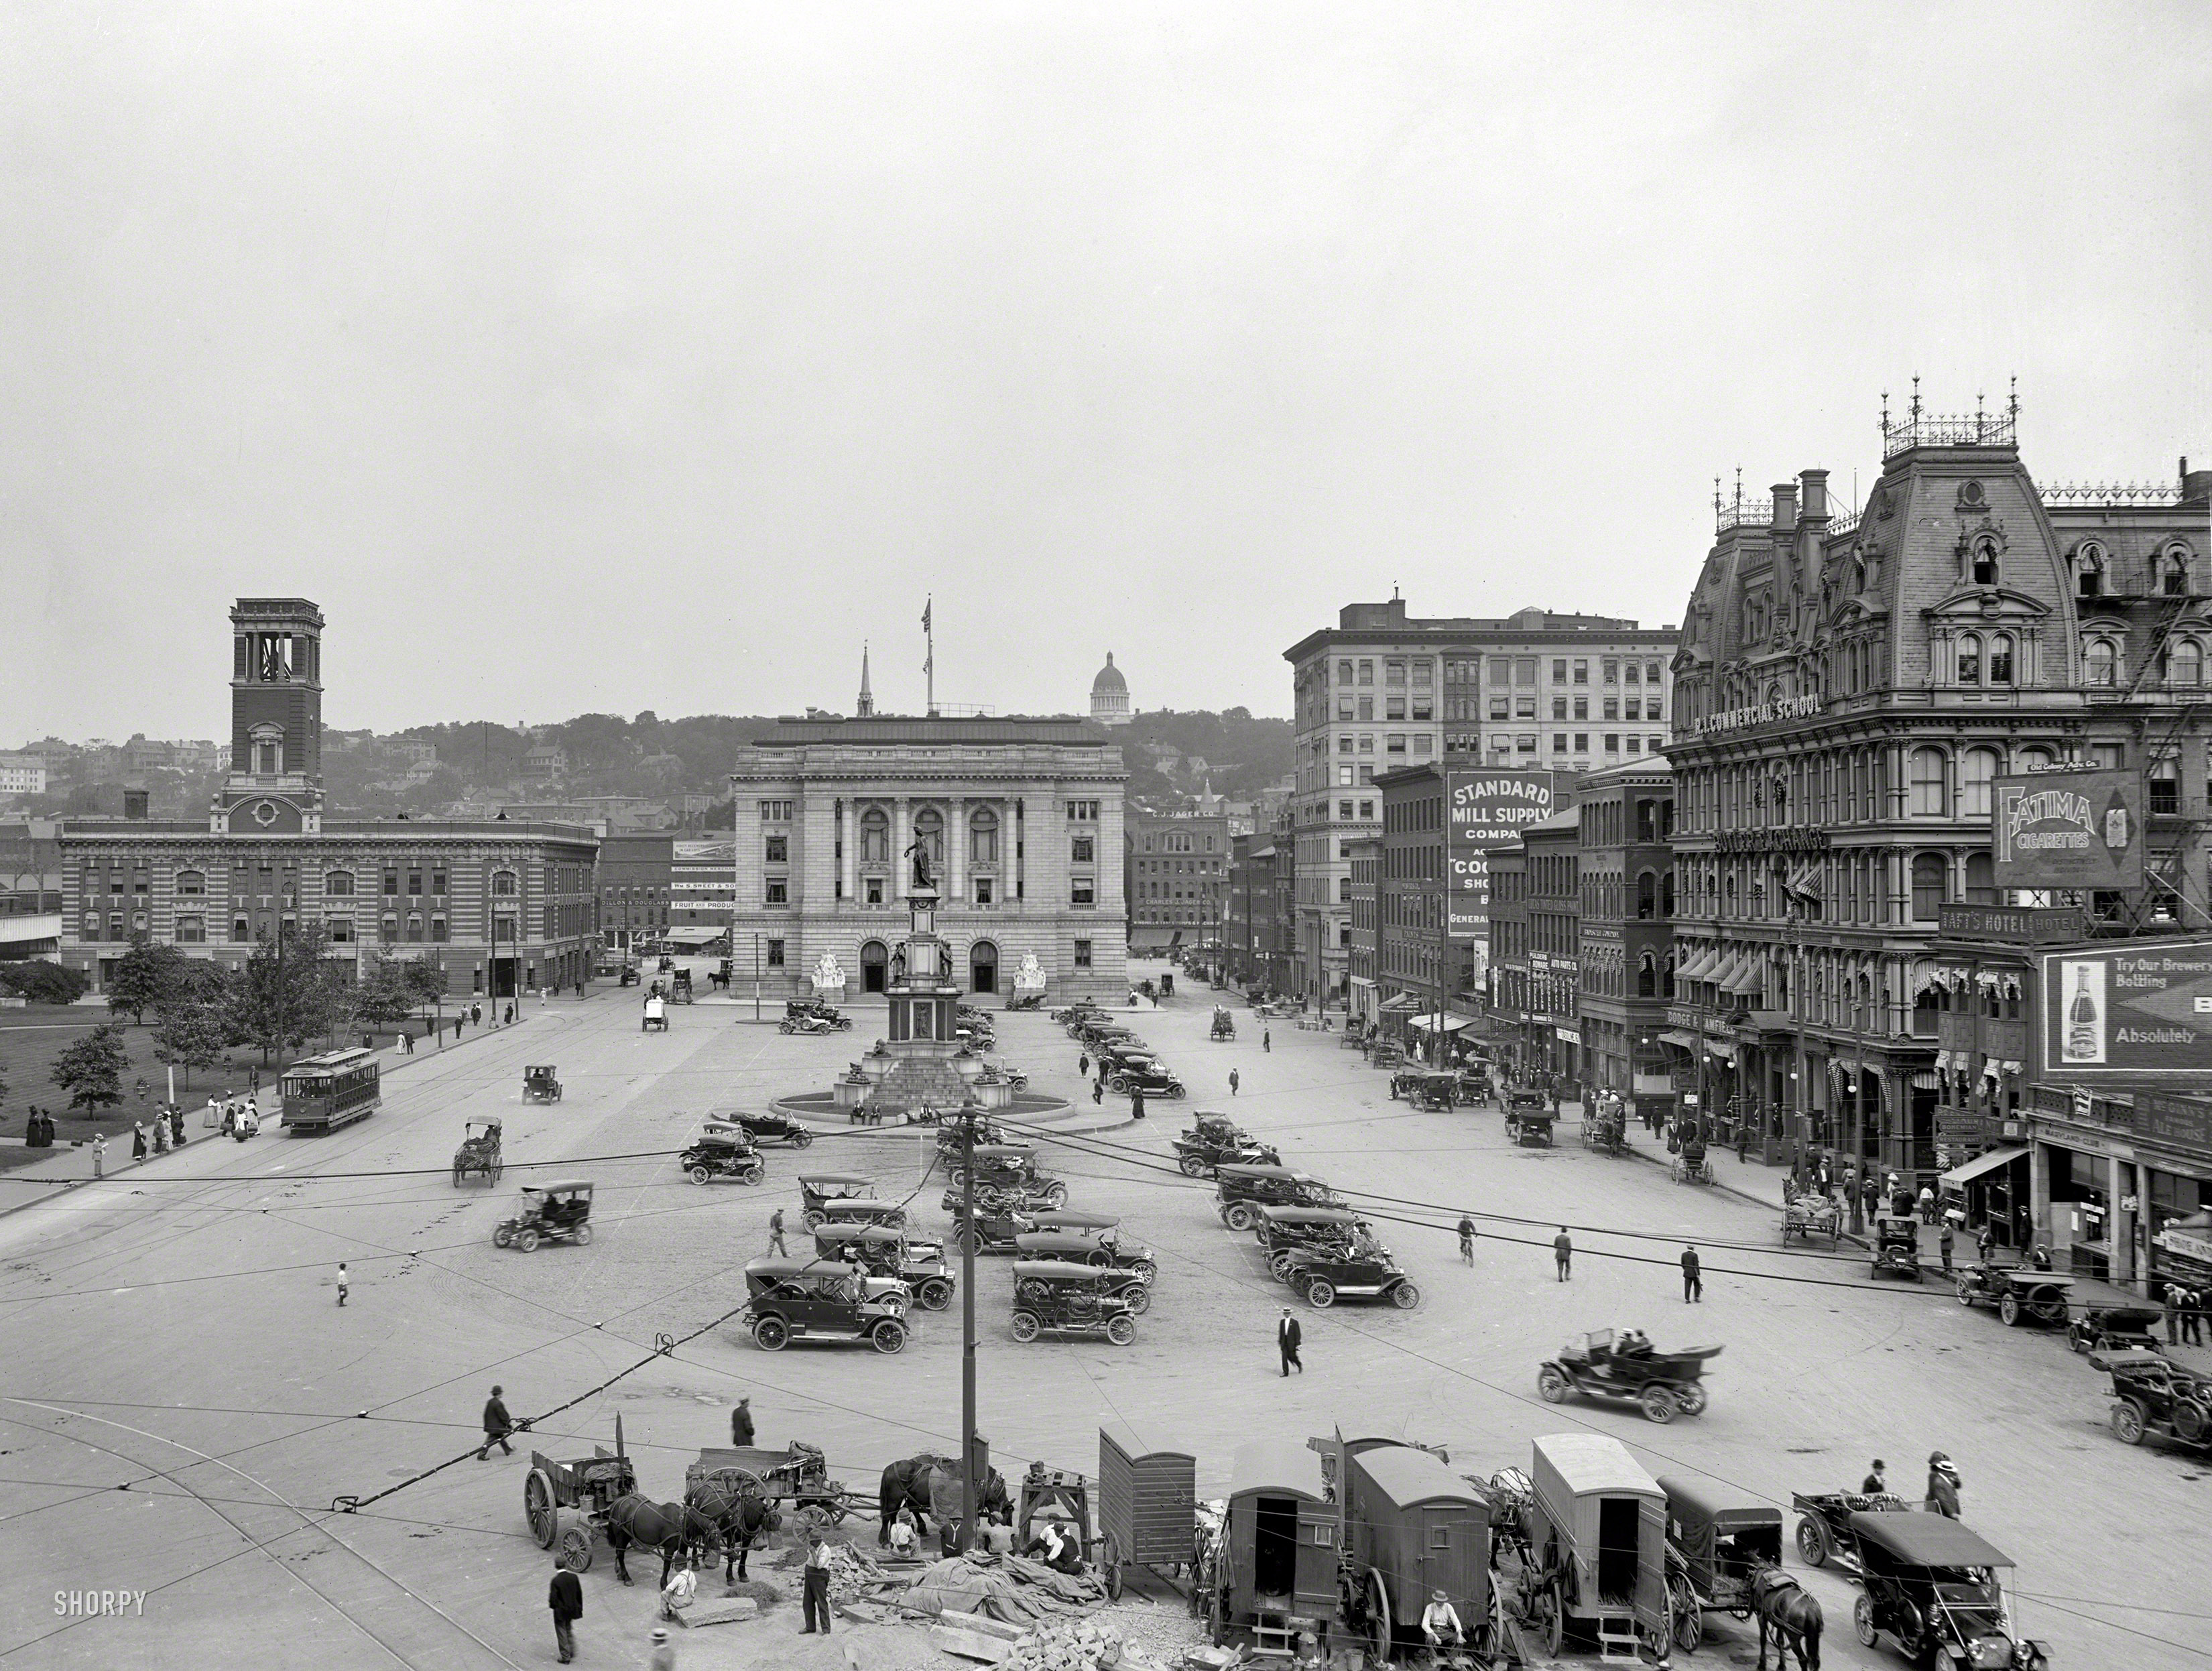 Providence, Rhode Island, circa 1910. "Exchange Place." Bring your motor-car. 8x10 inch dry plate glass negative, Detroit Publishing Company. View full size.